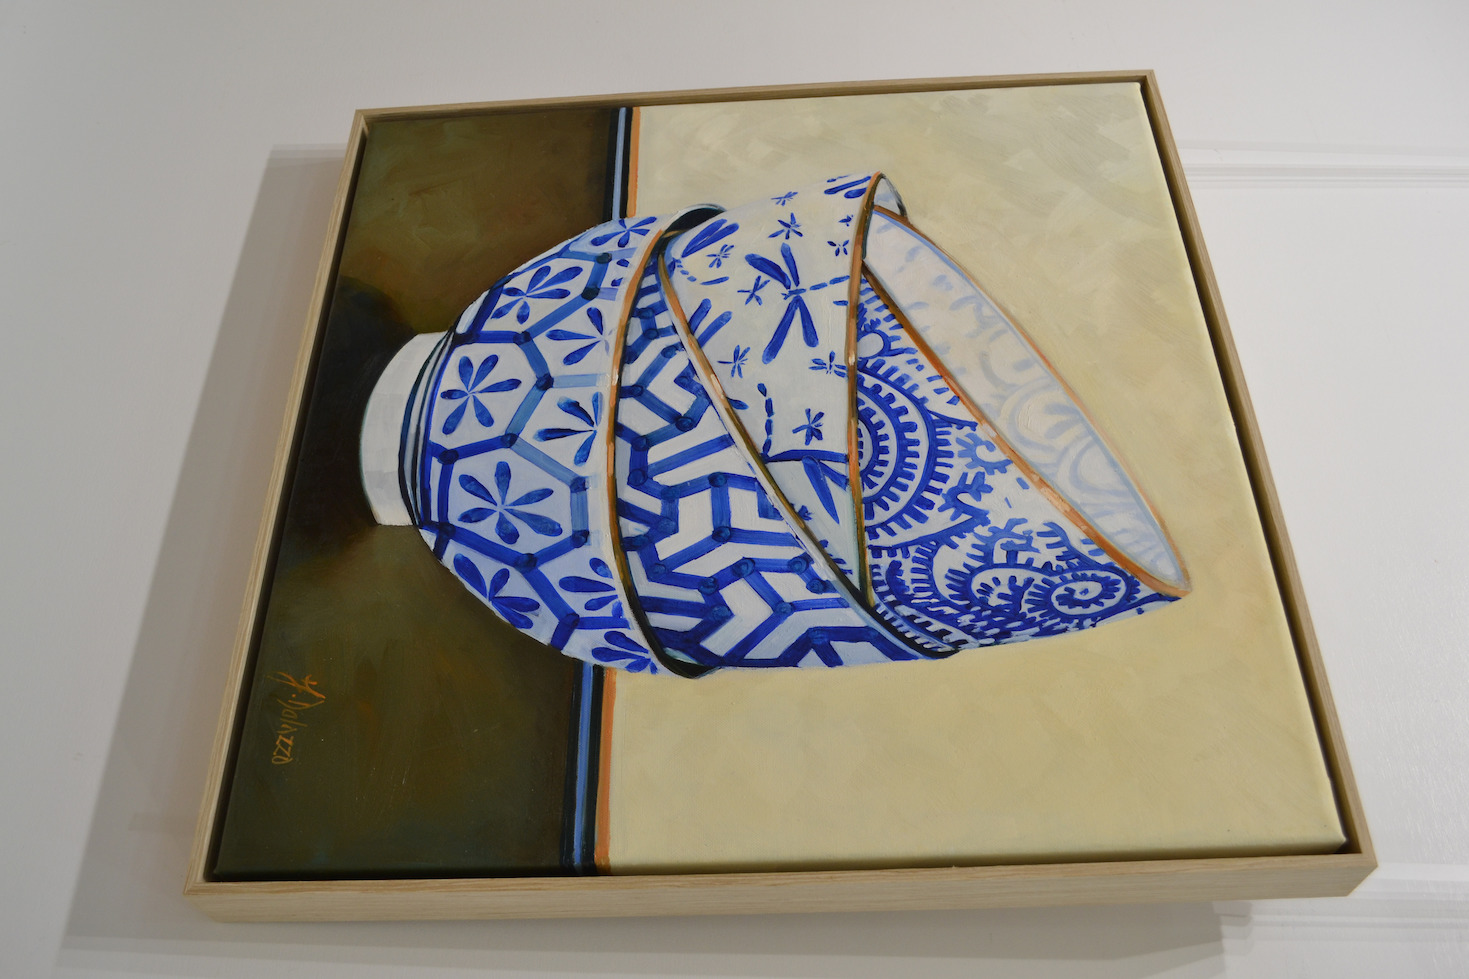 Framed Side View Of Still Life Painting "Monyou Bowls 3" By Judith Dalozzo